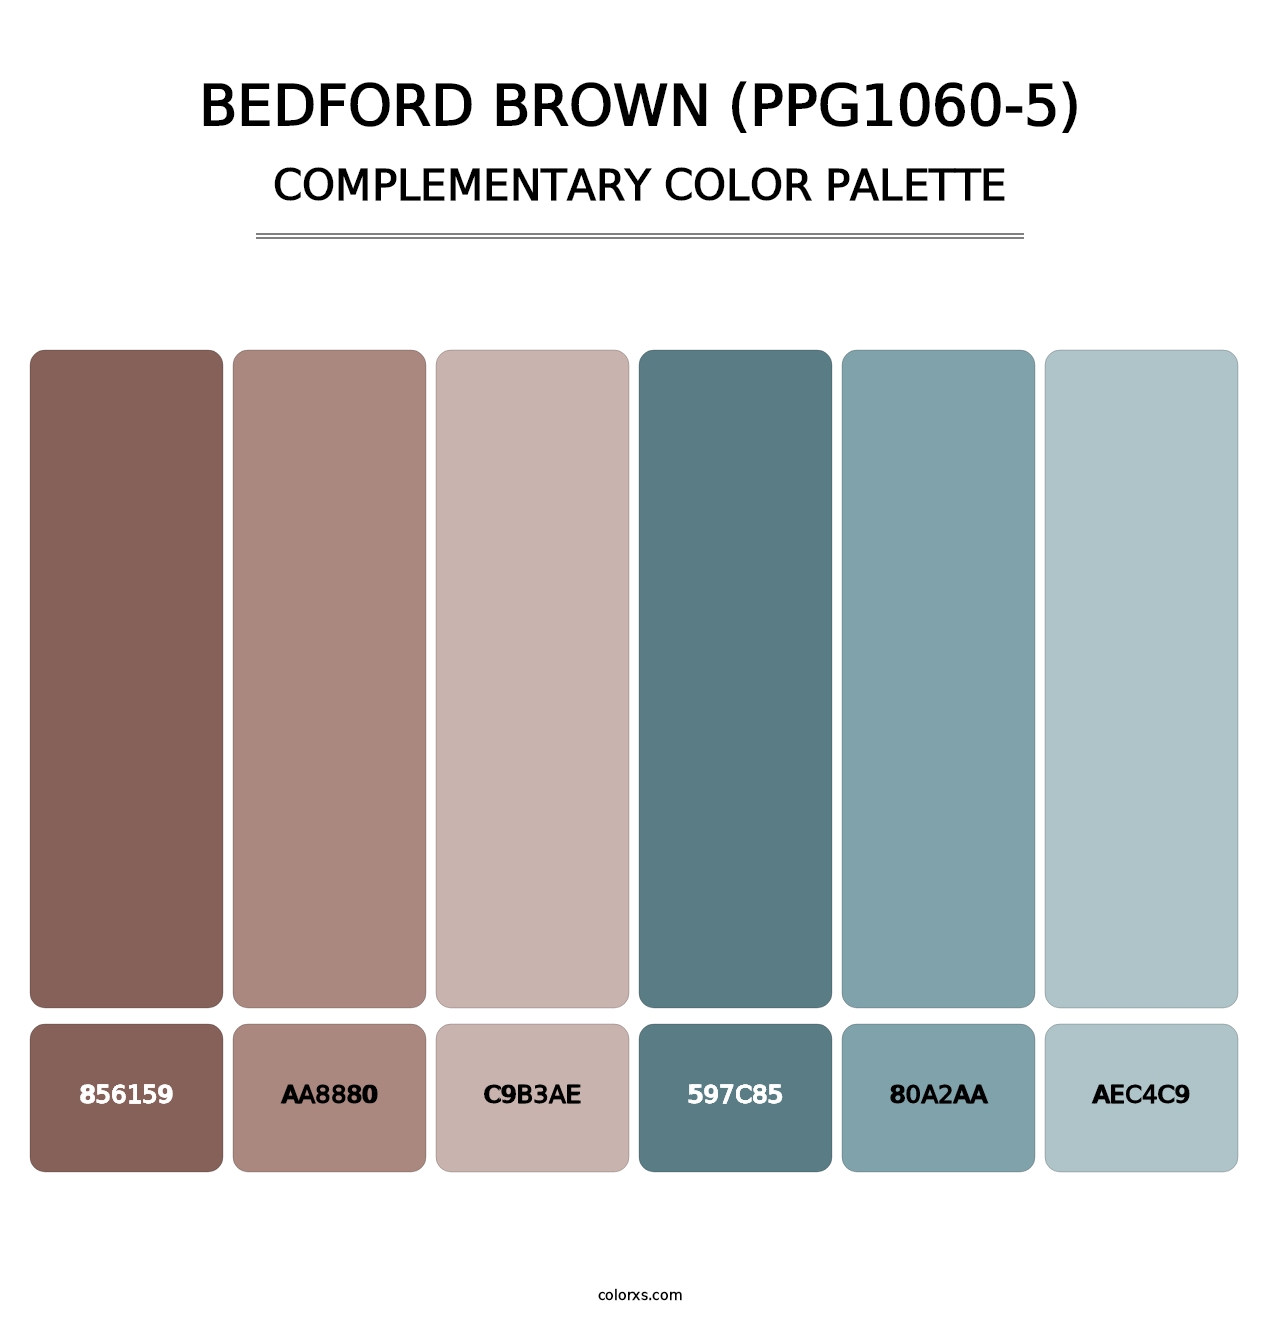 Bedford Brown (PPG1060-5) - Complementary Color Palette